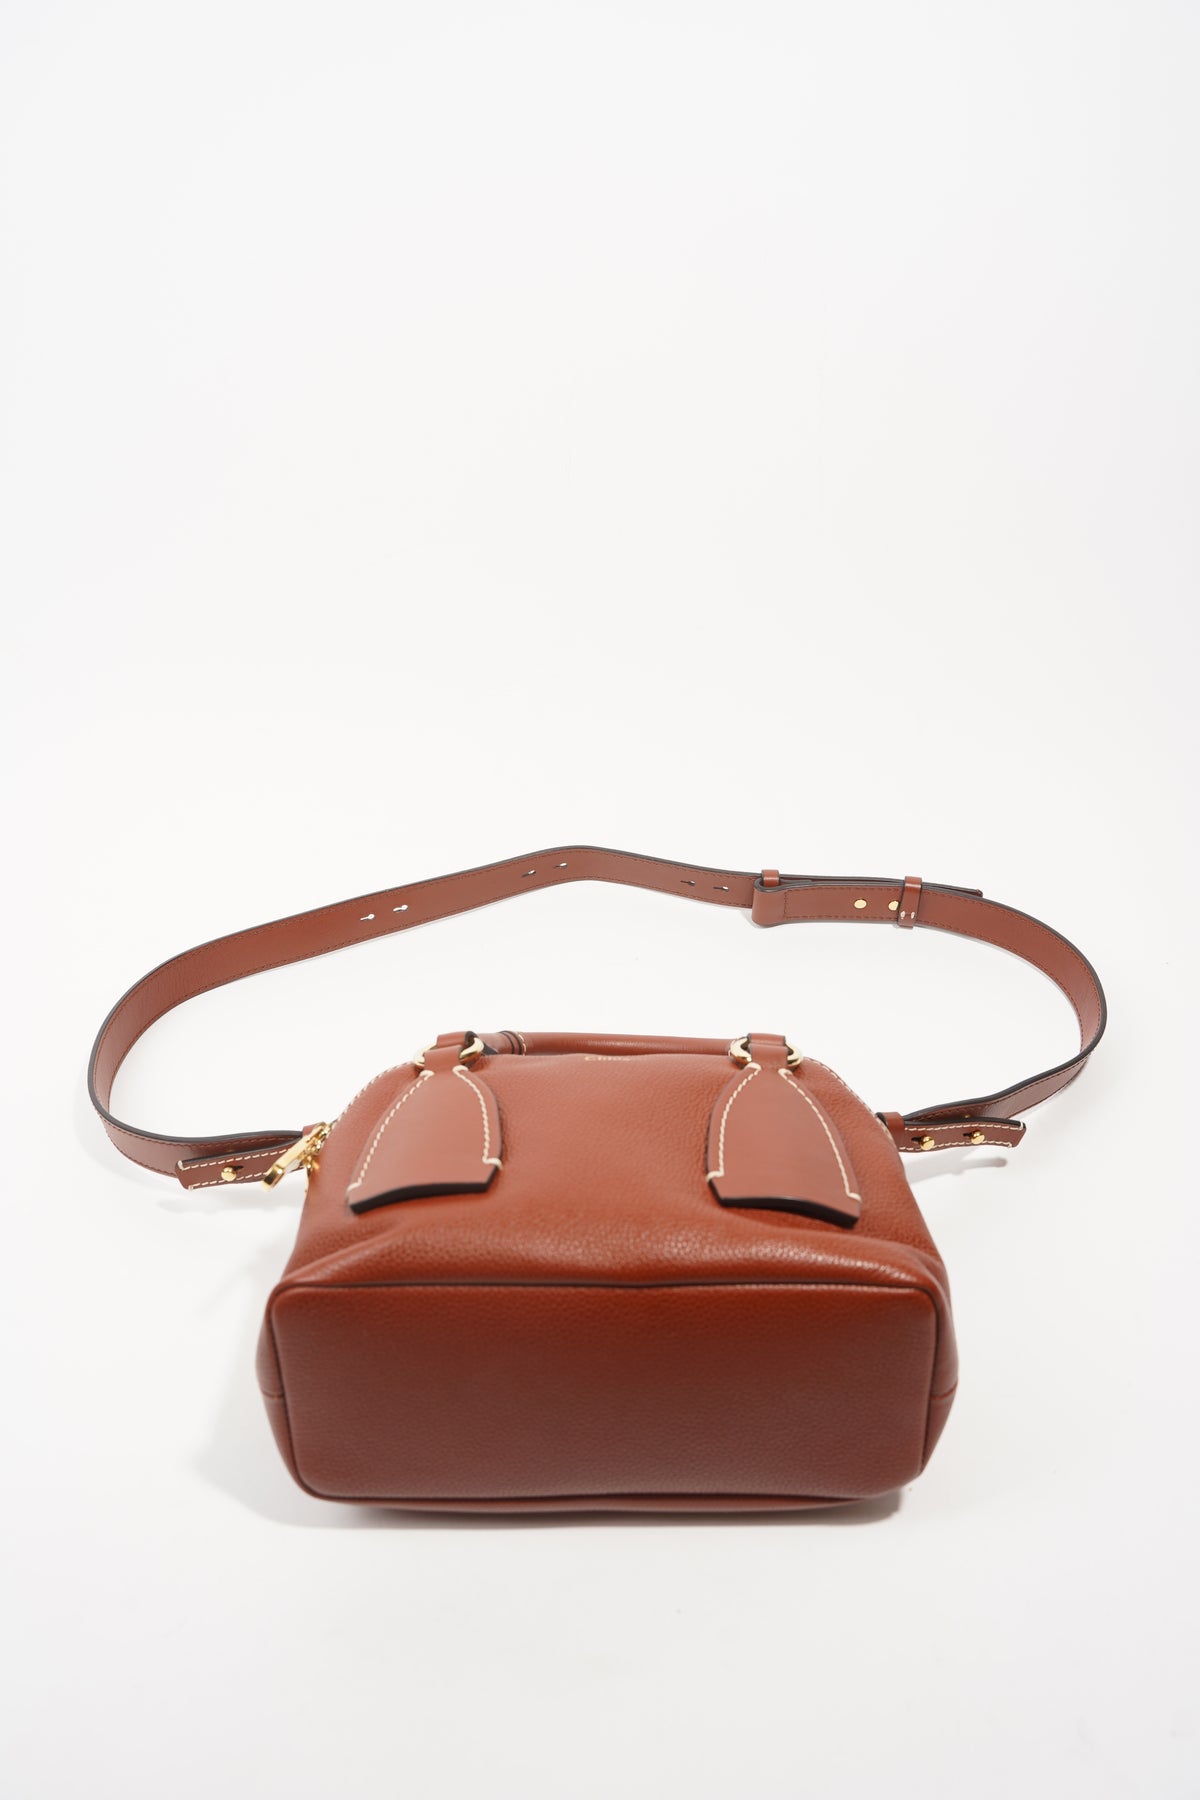 The cute Chloé Daria Small bag is on top of my Wish List